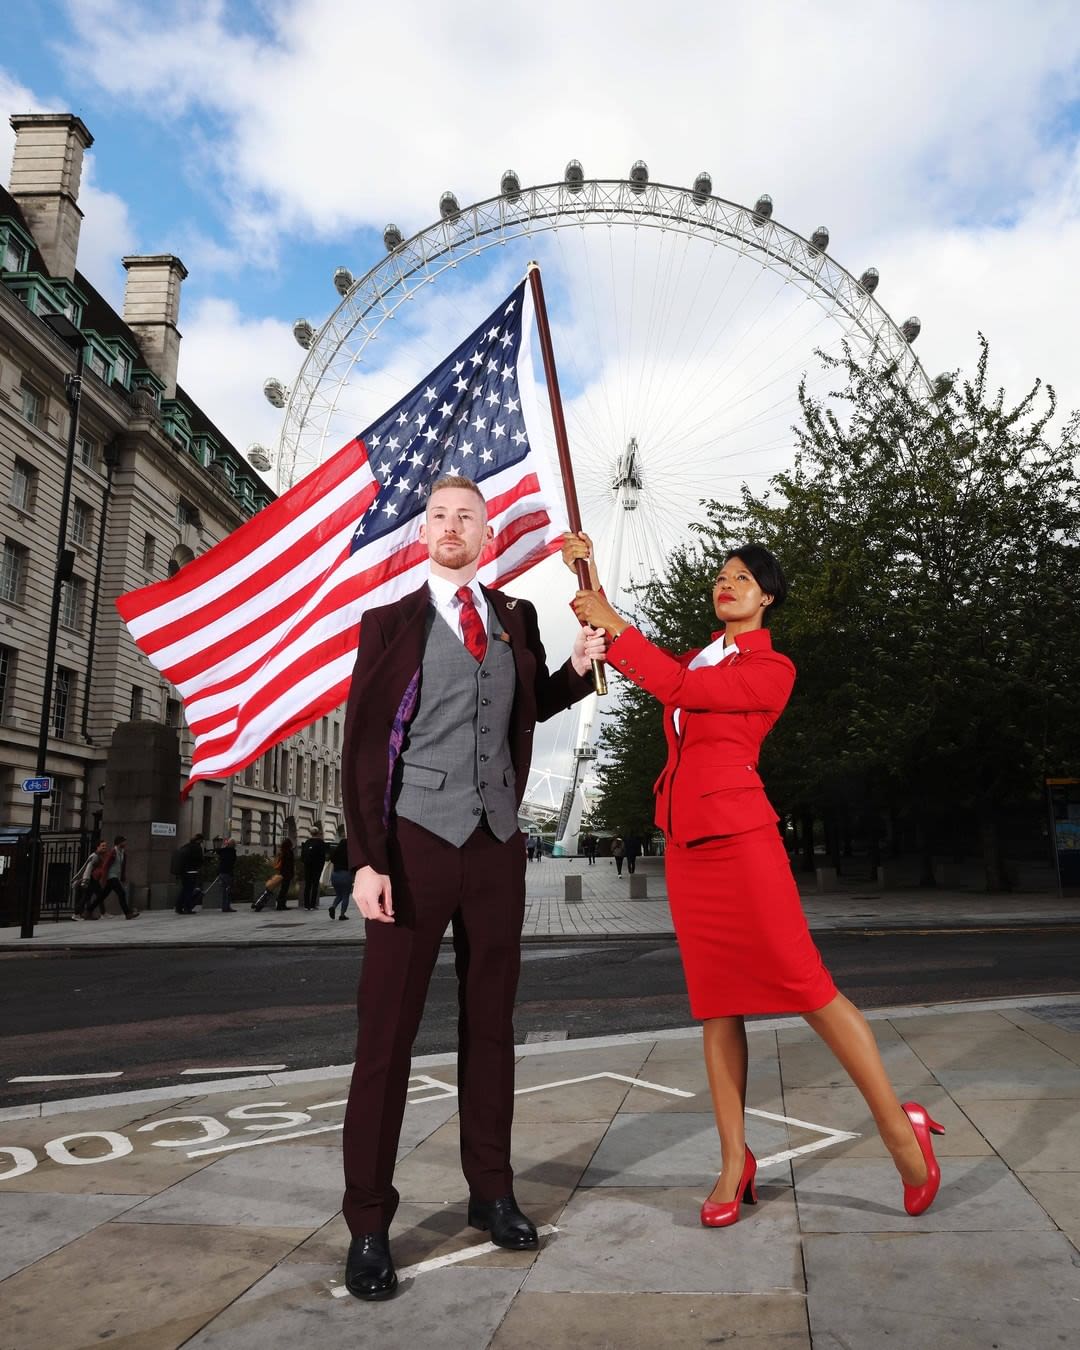 Two cabin crew members waving an American flag in front of the London Eye